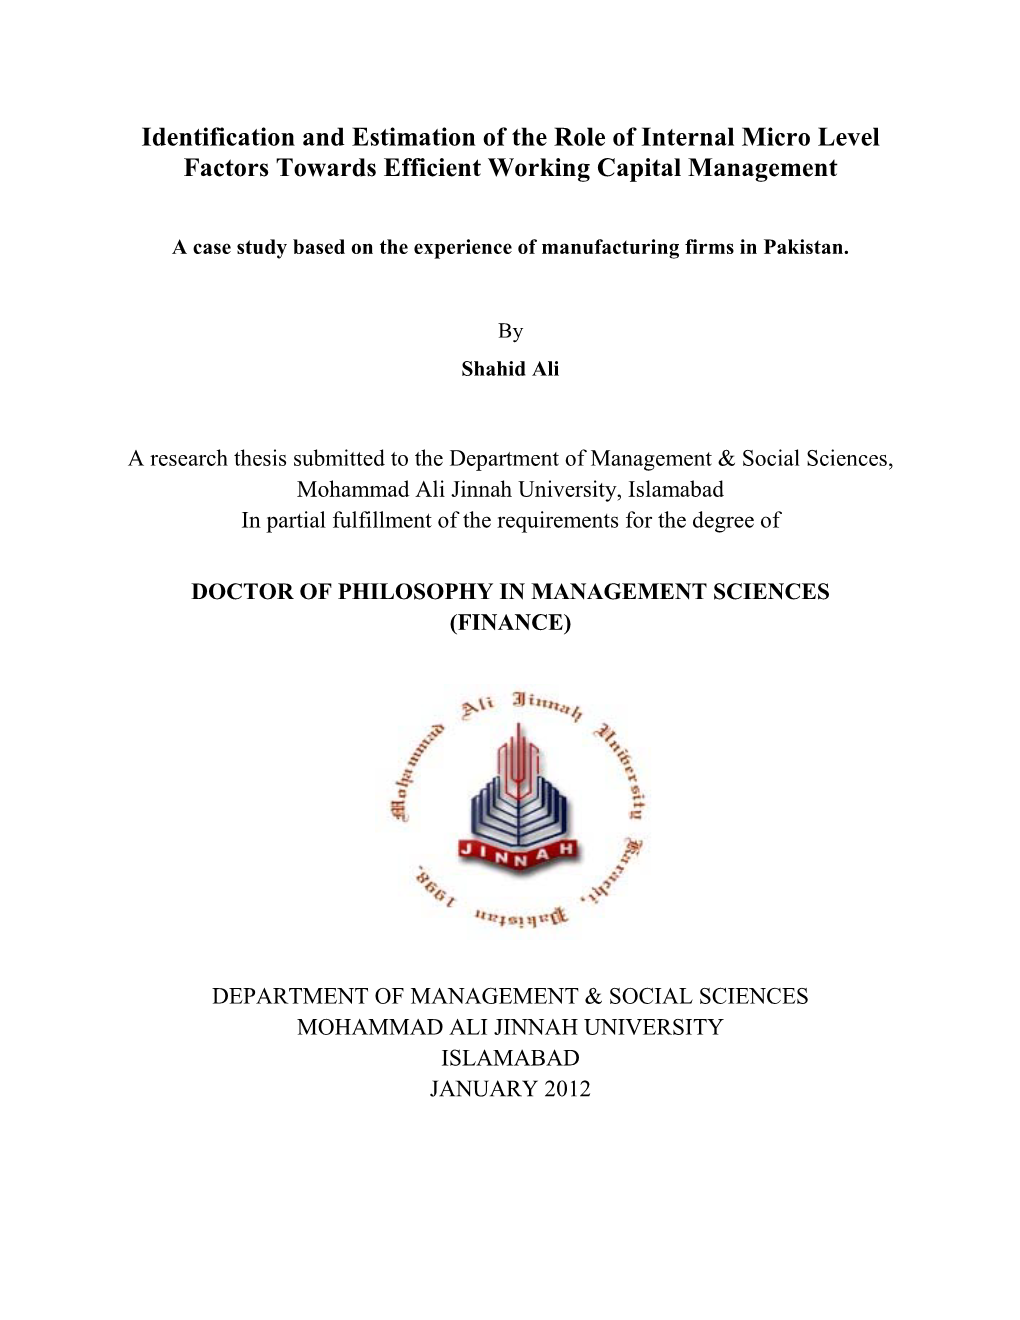 Identification and Estimation of the Role of Internal Micro Level Factors Towards Efficient Working Capital Management